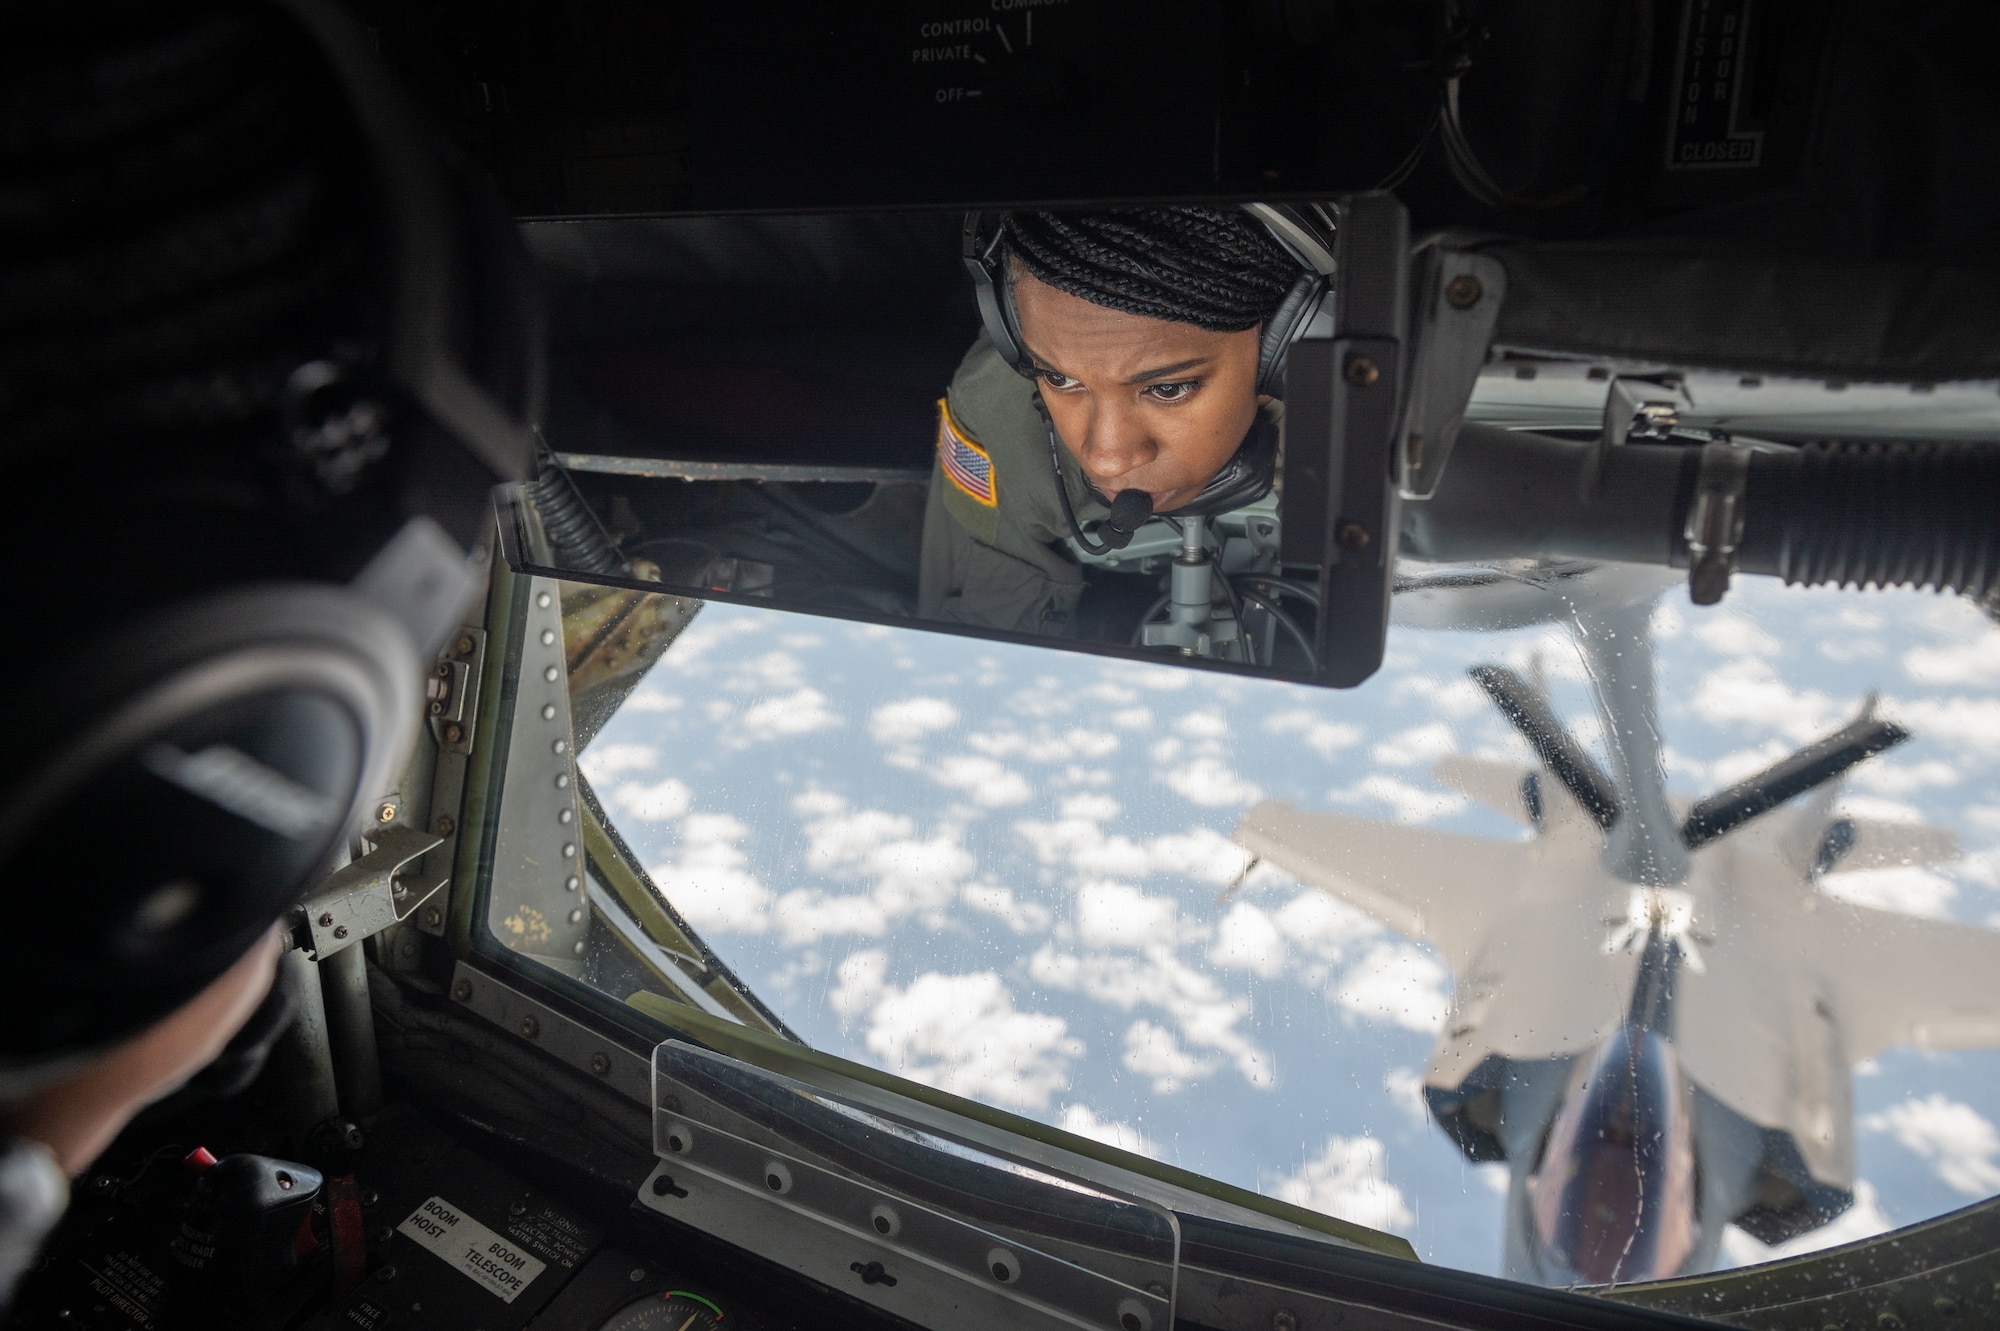 Airman fuels a jet in the air